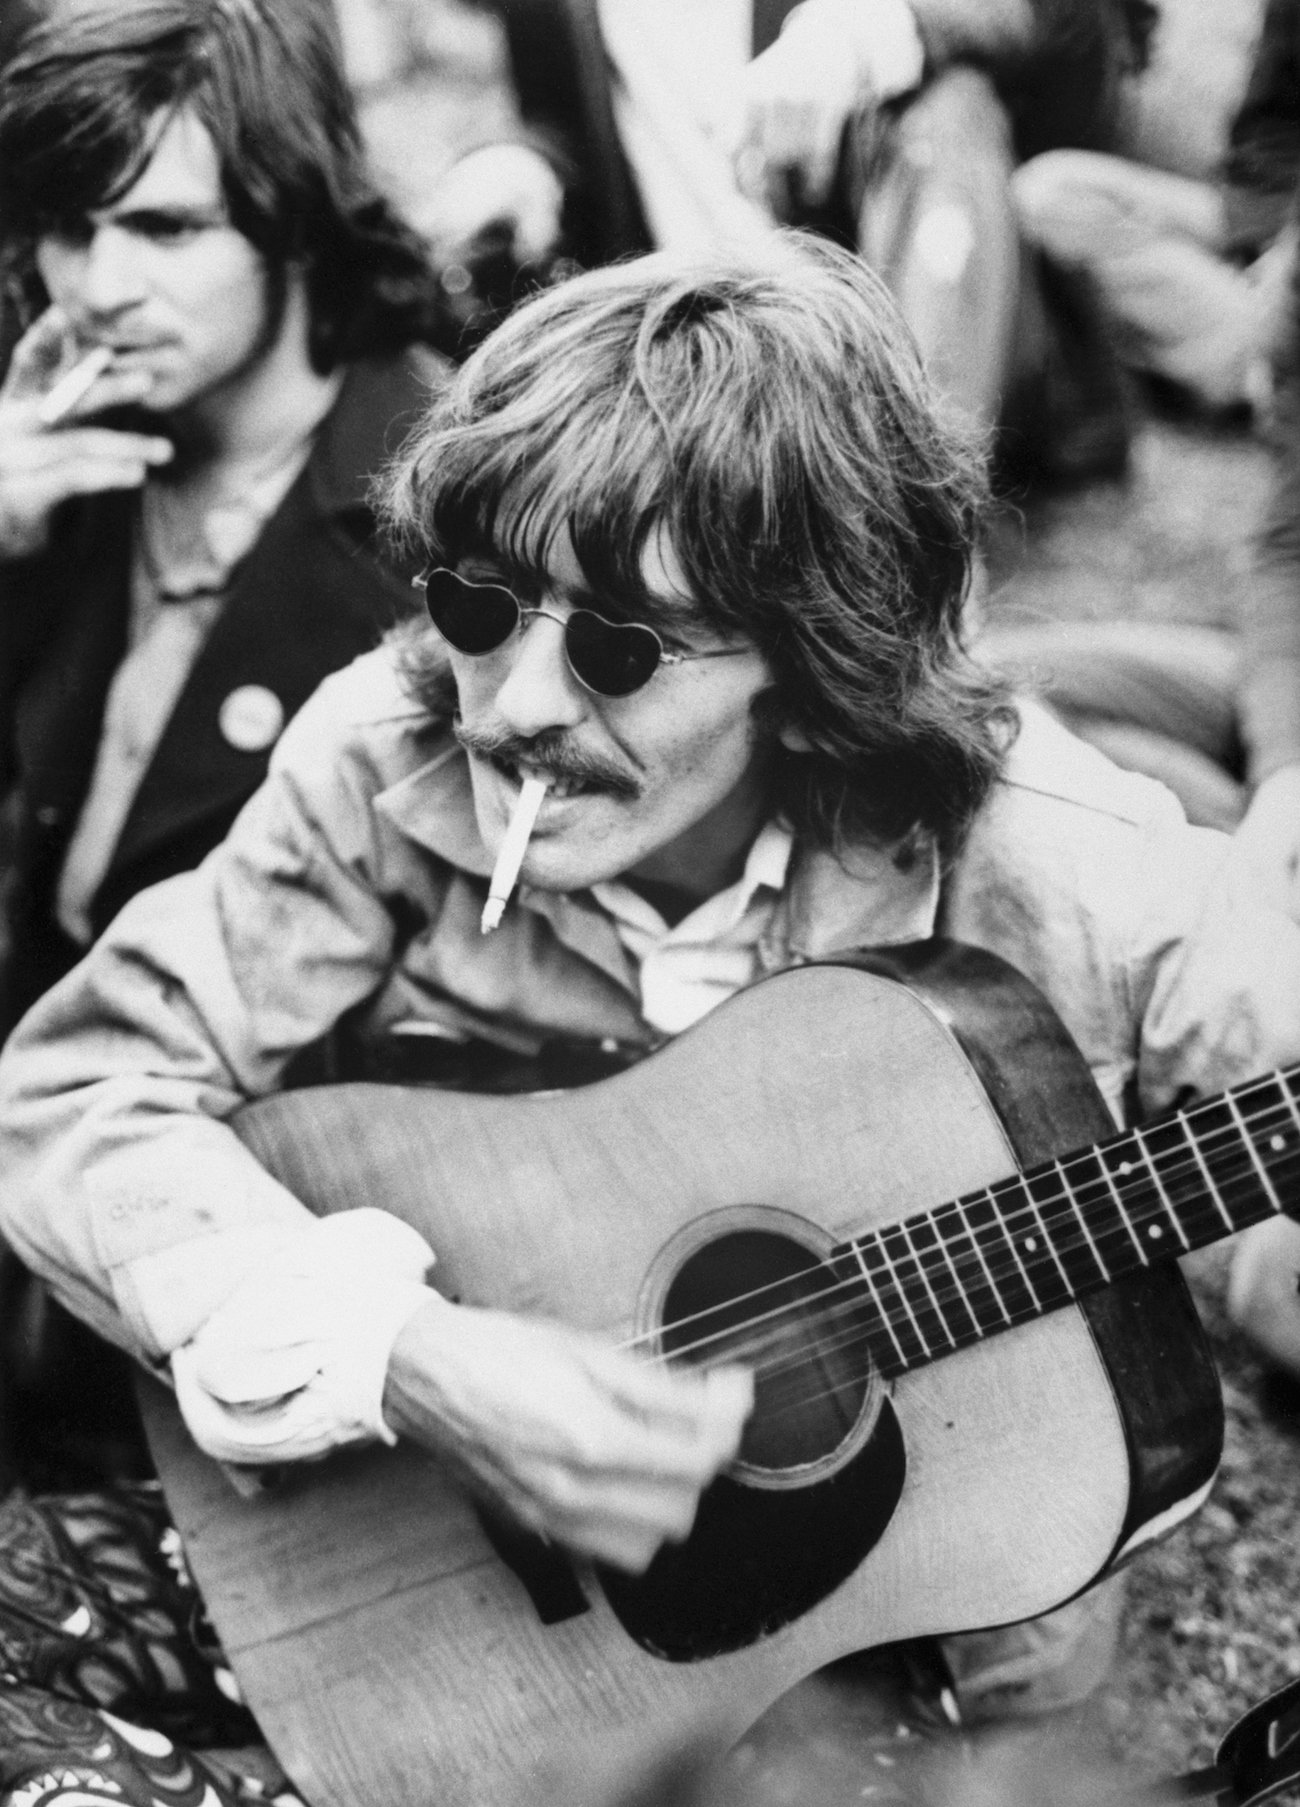 George Harrison playing guitar for fans at Haight-Ashbury in 1967.